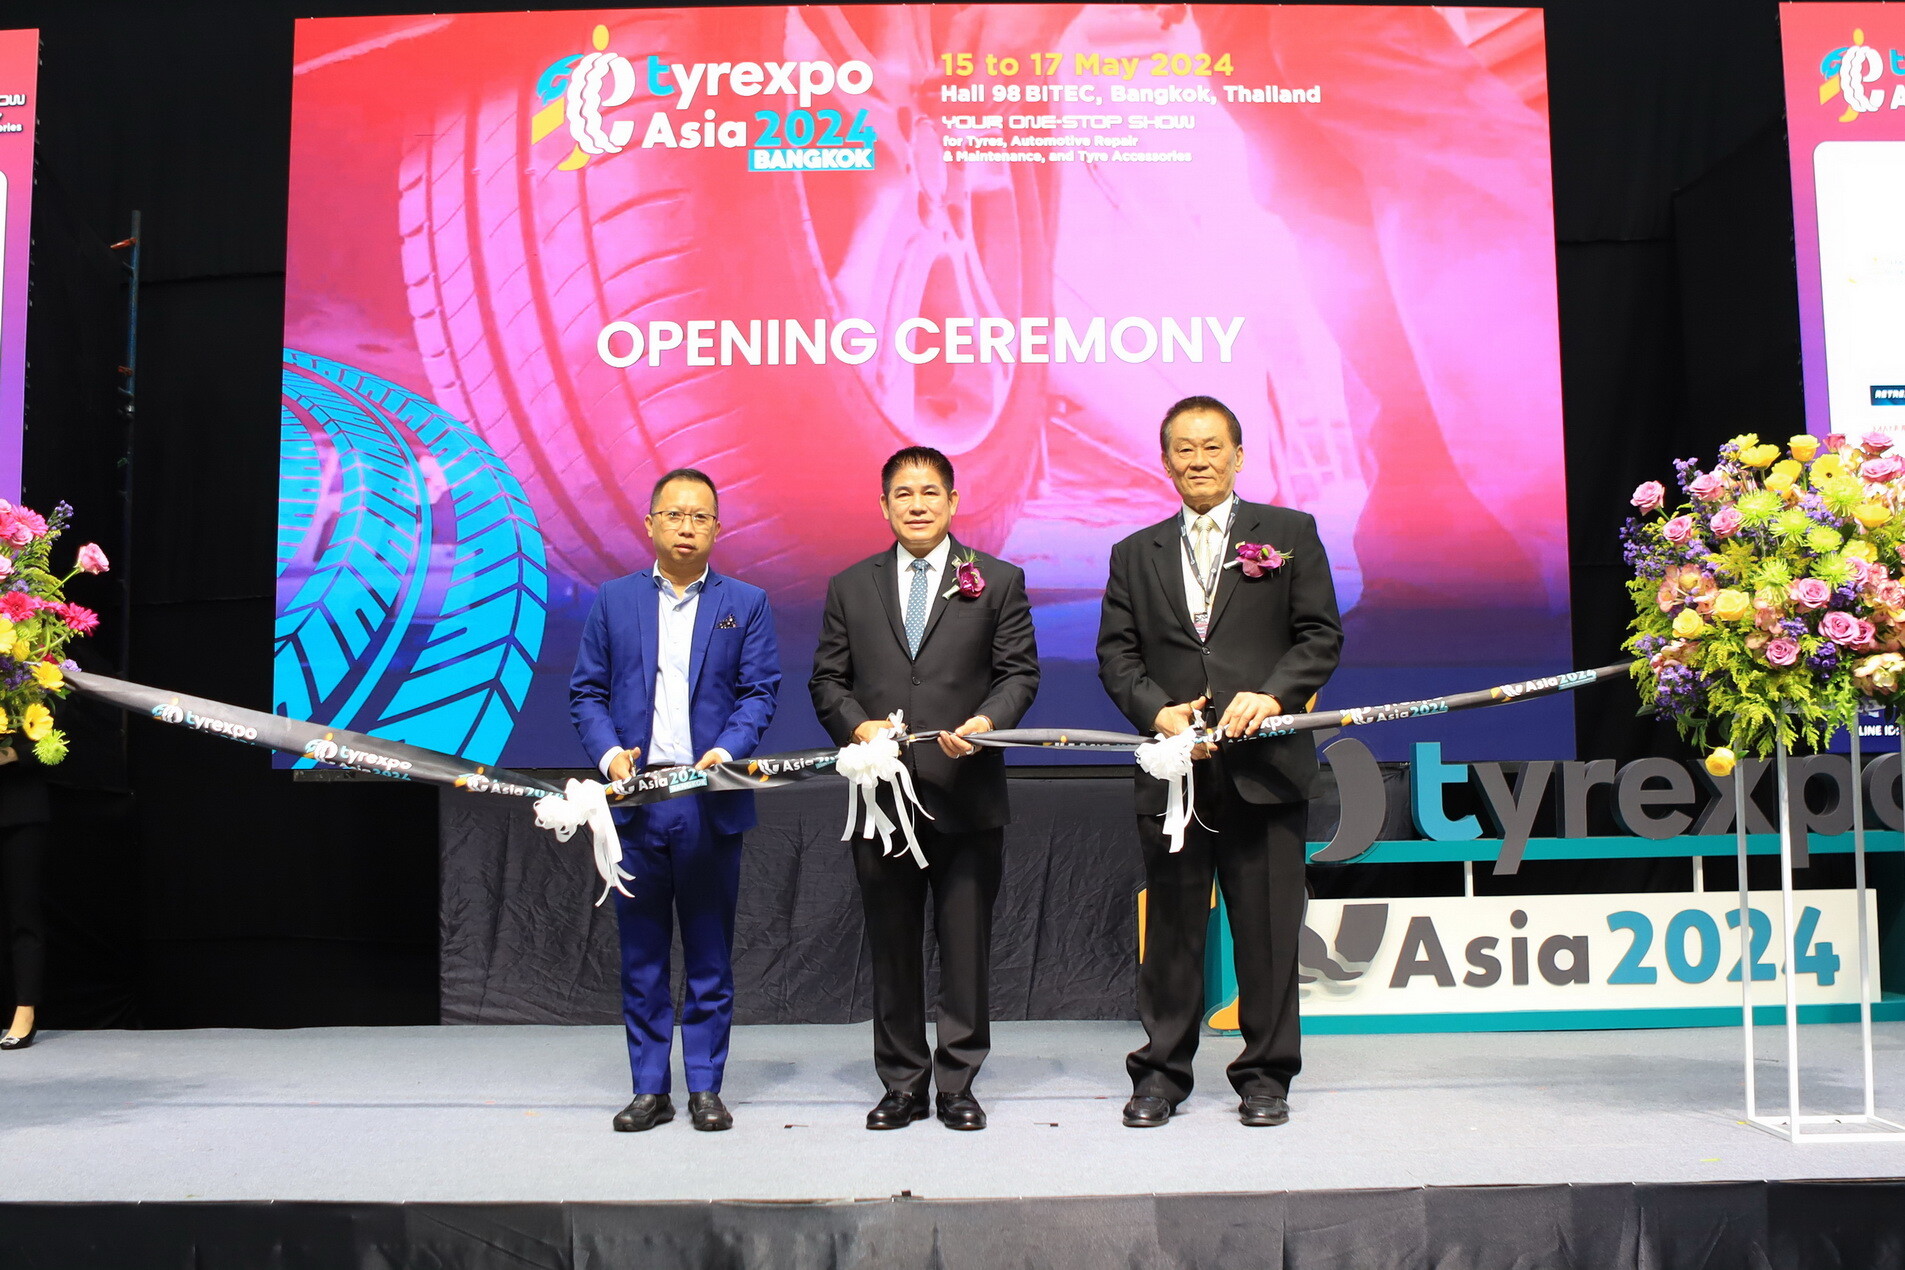 Ready for 'TyreXpo Asia 2024,' the event that covers everything about the 'tyre industry.' Held for the first time in Thailand, it aims to push Thailand to become a global market leader."